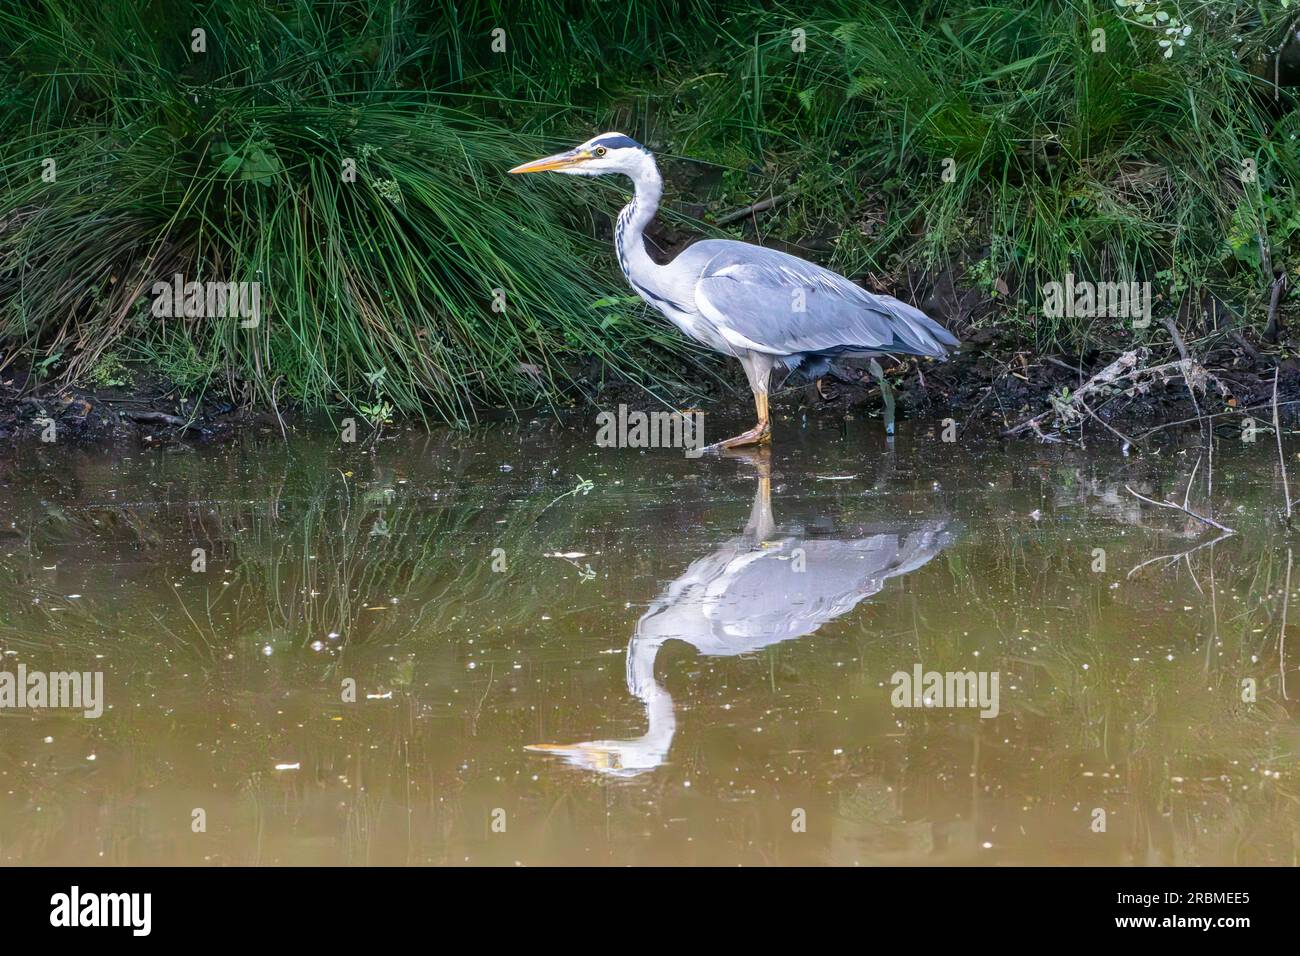 Refection of Heron in water Stock Photo